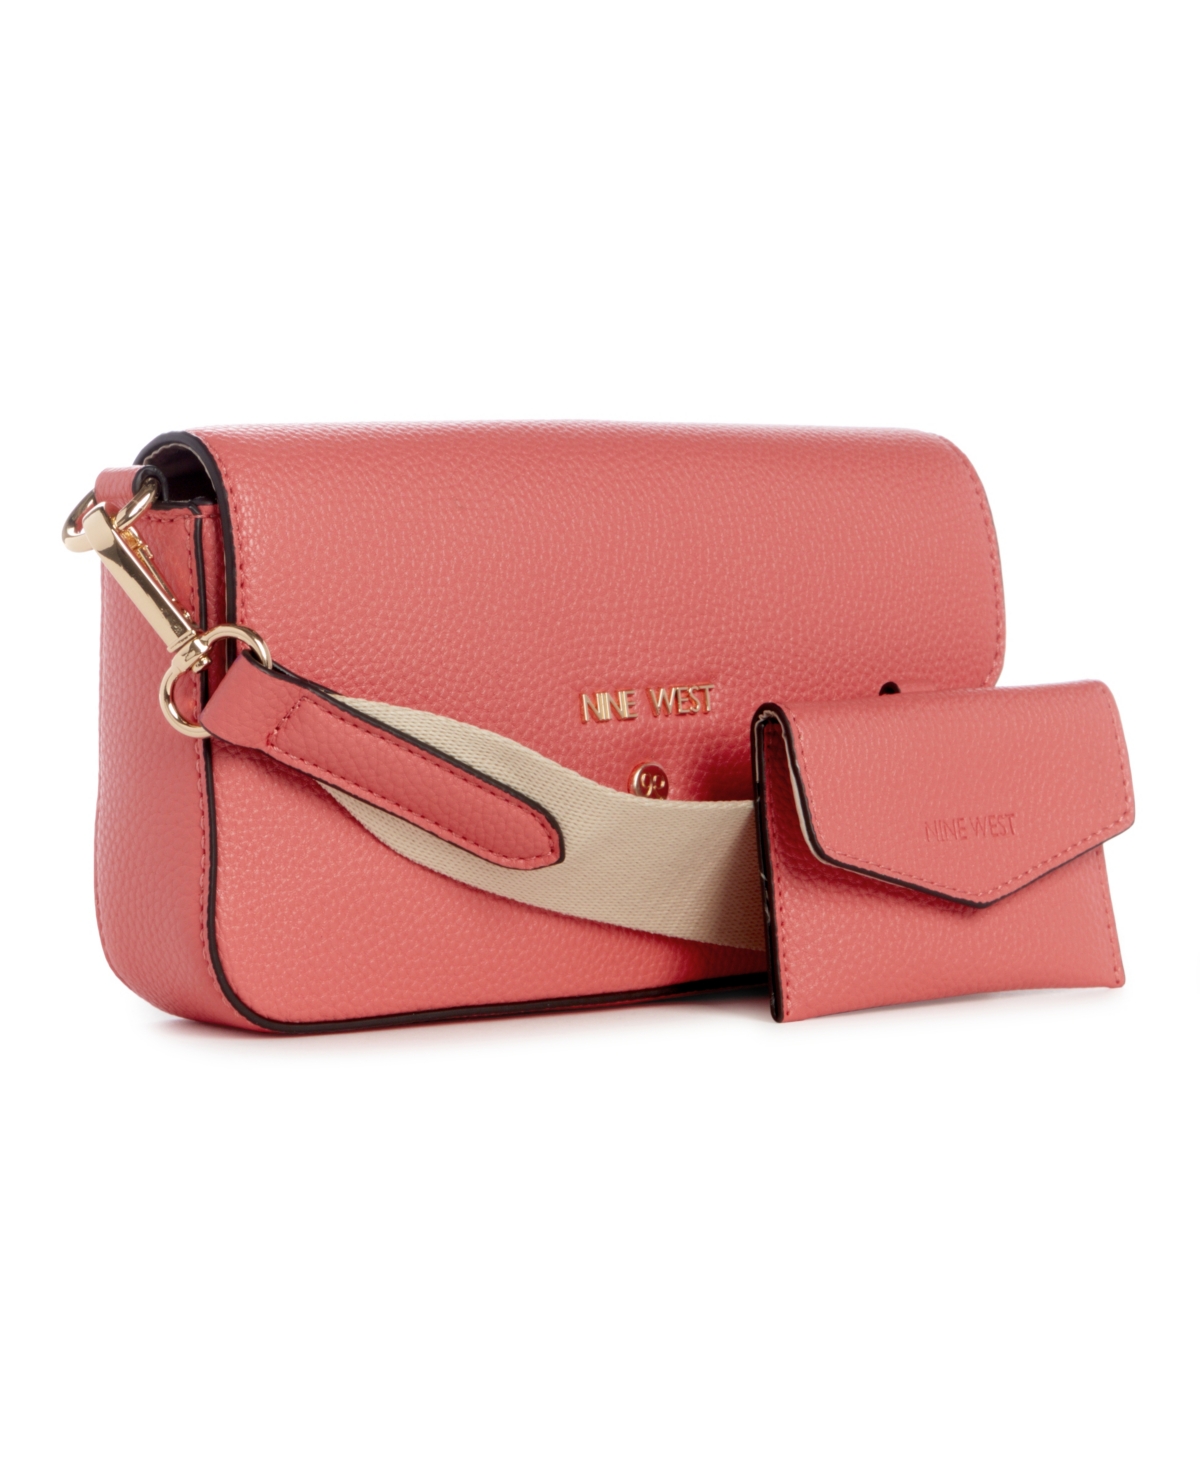 Shop Nine West Peaches Crossbody Flap With Card Case In Coral